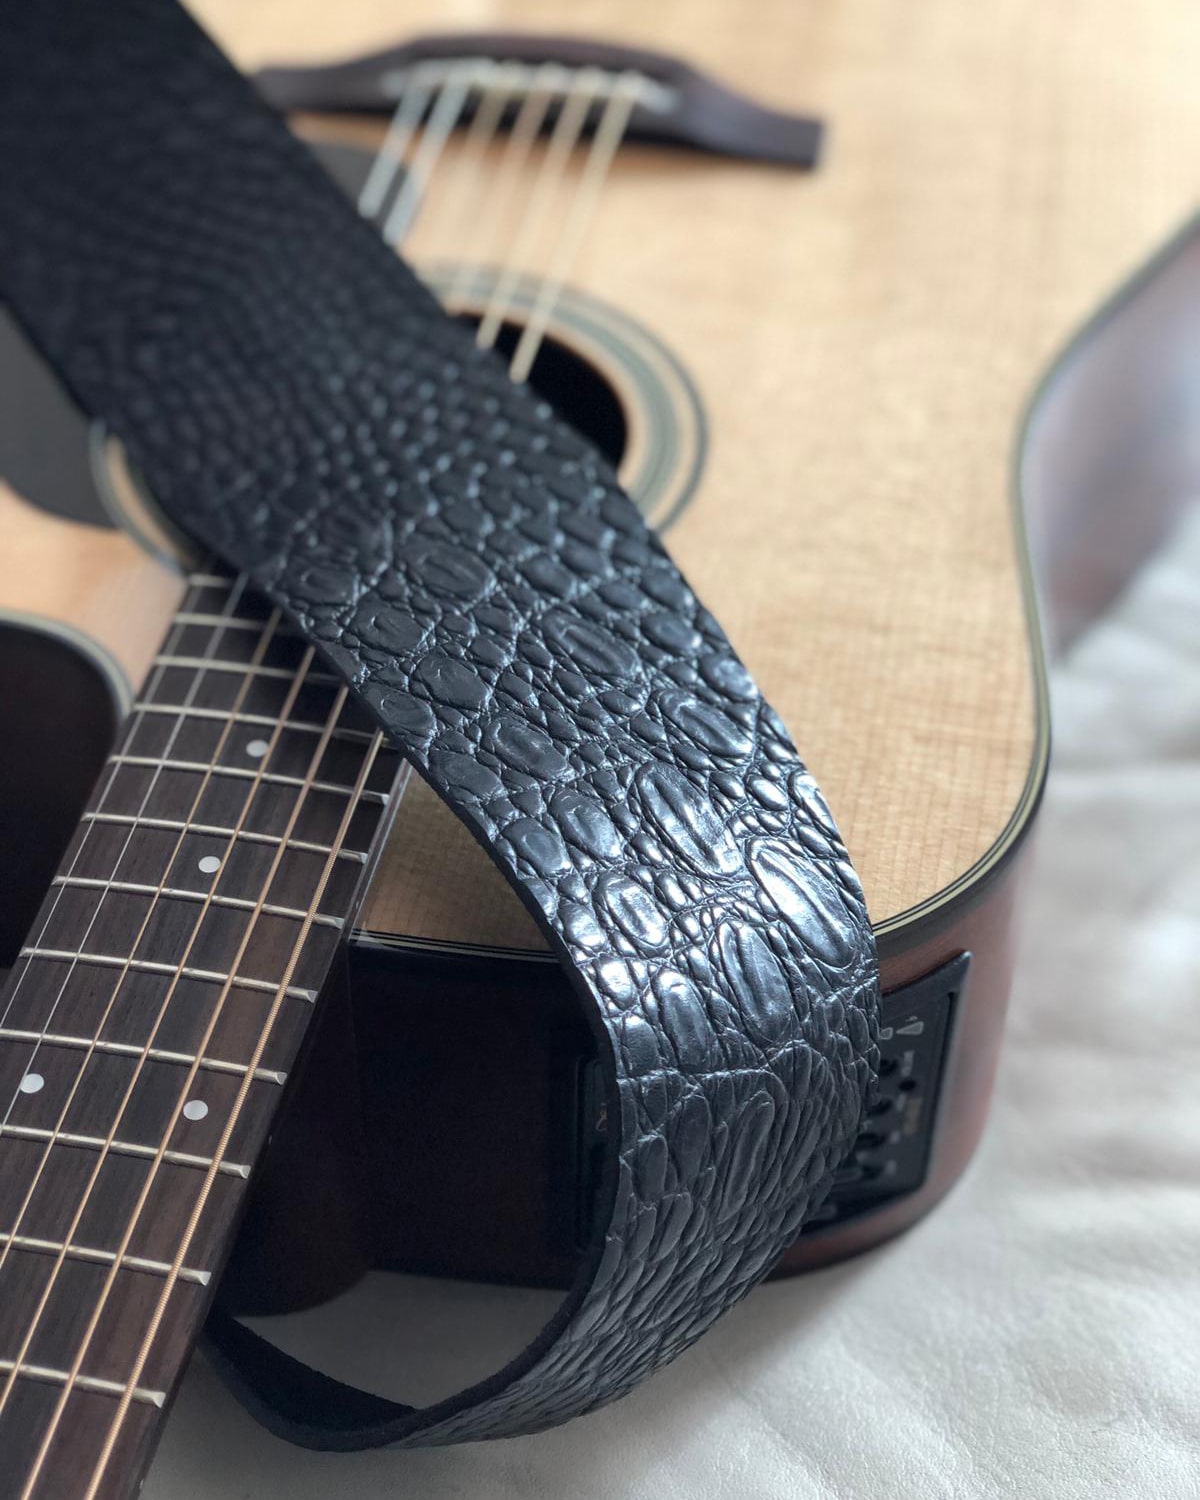 How to make the leather strap hole larger? - The Acoustic Guitar Forum